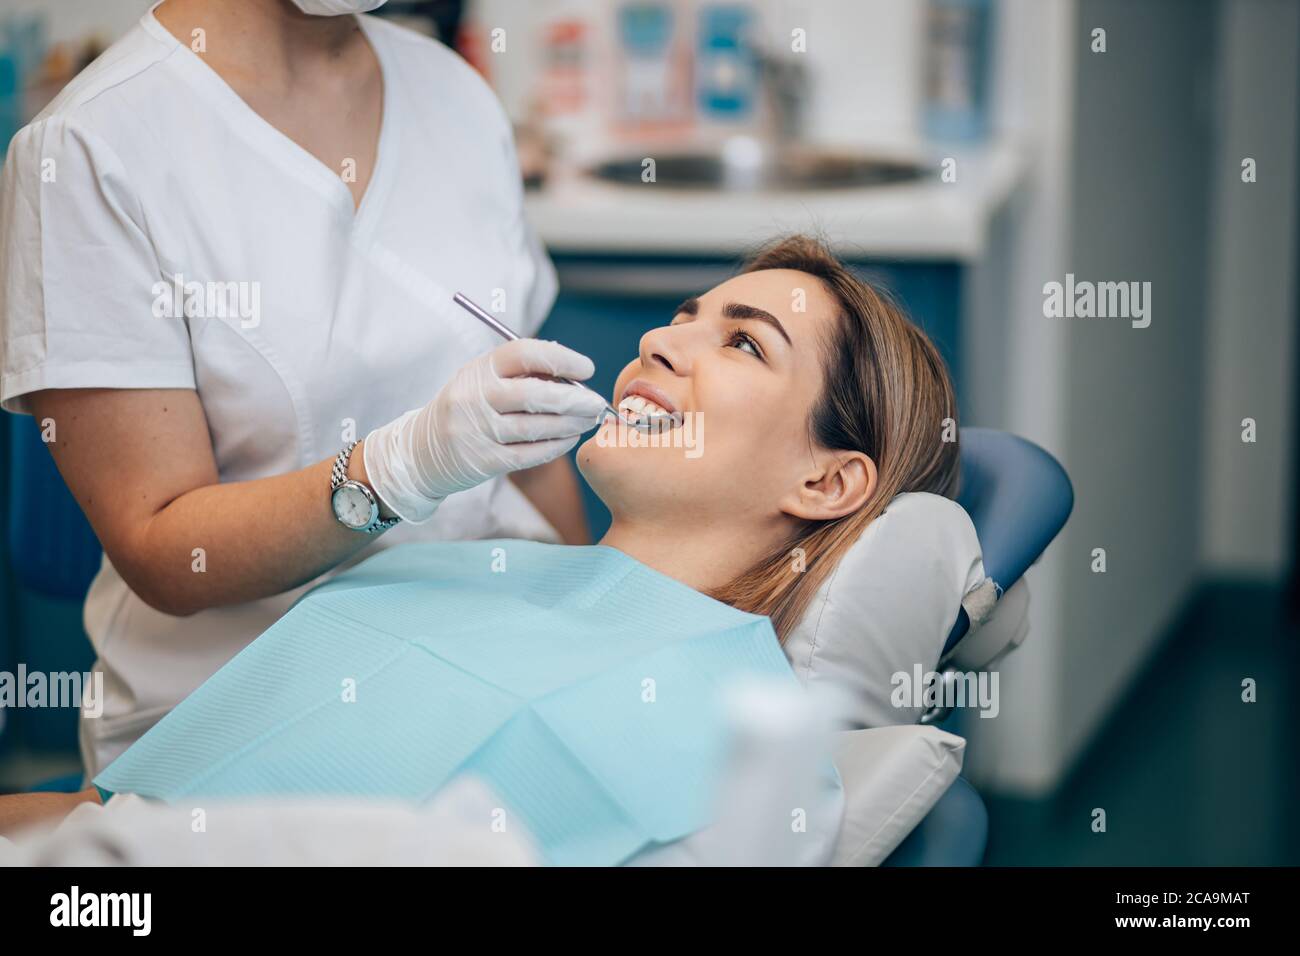 careful professional dentist in white uniform treating patient's teeth, making perfect smile for patients, using medical equipment Stock Photo